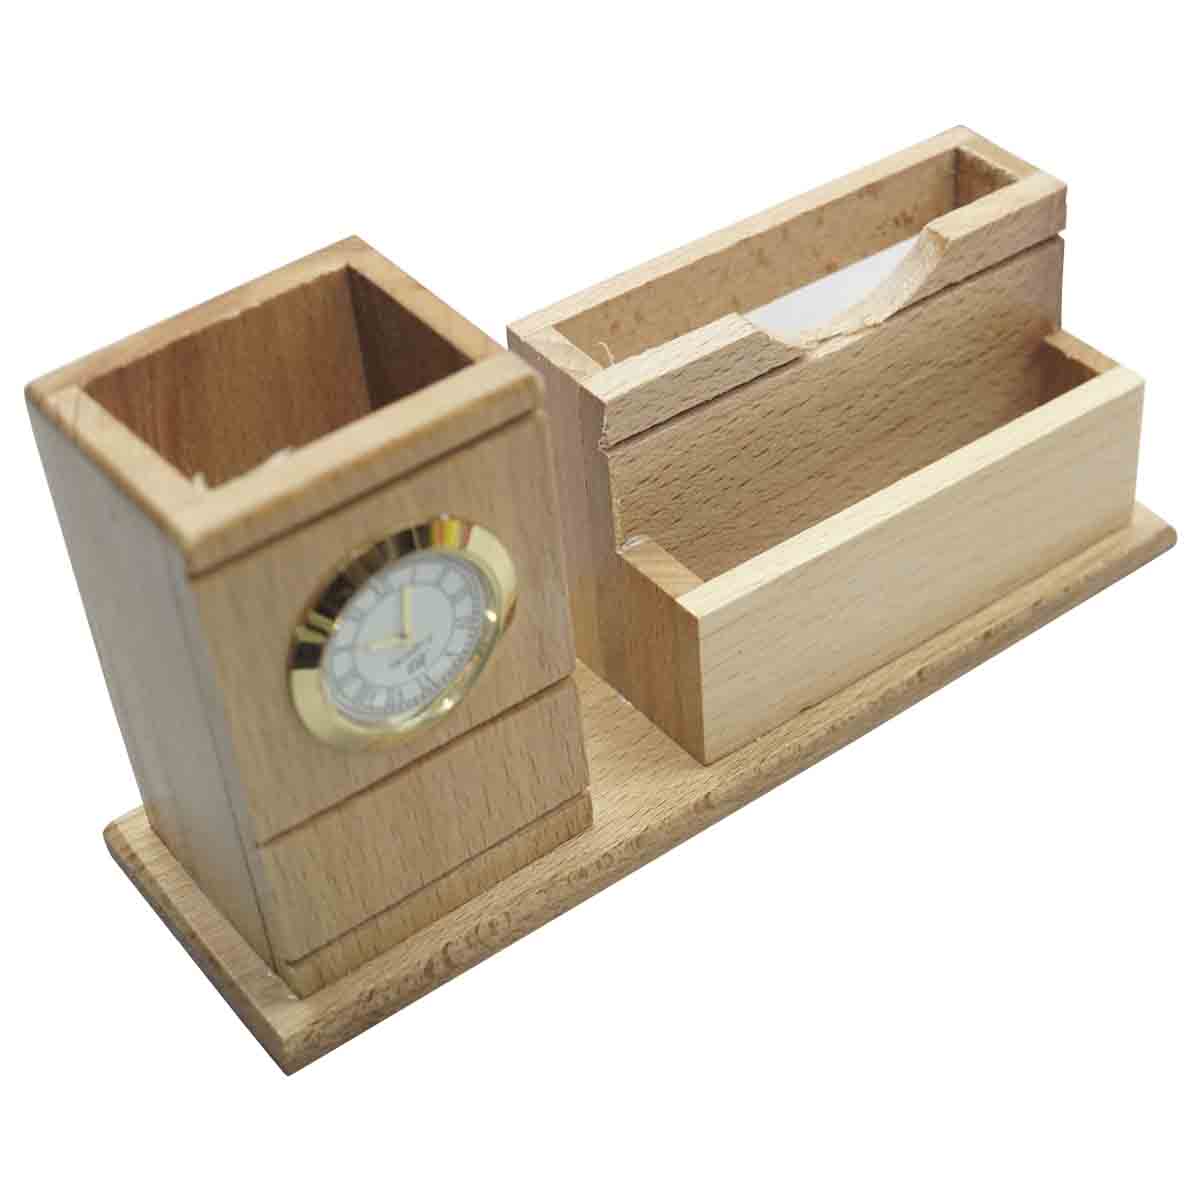 penhouse.in Card Holder clock and Pen holder wooden stand with customization SKU - 87132